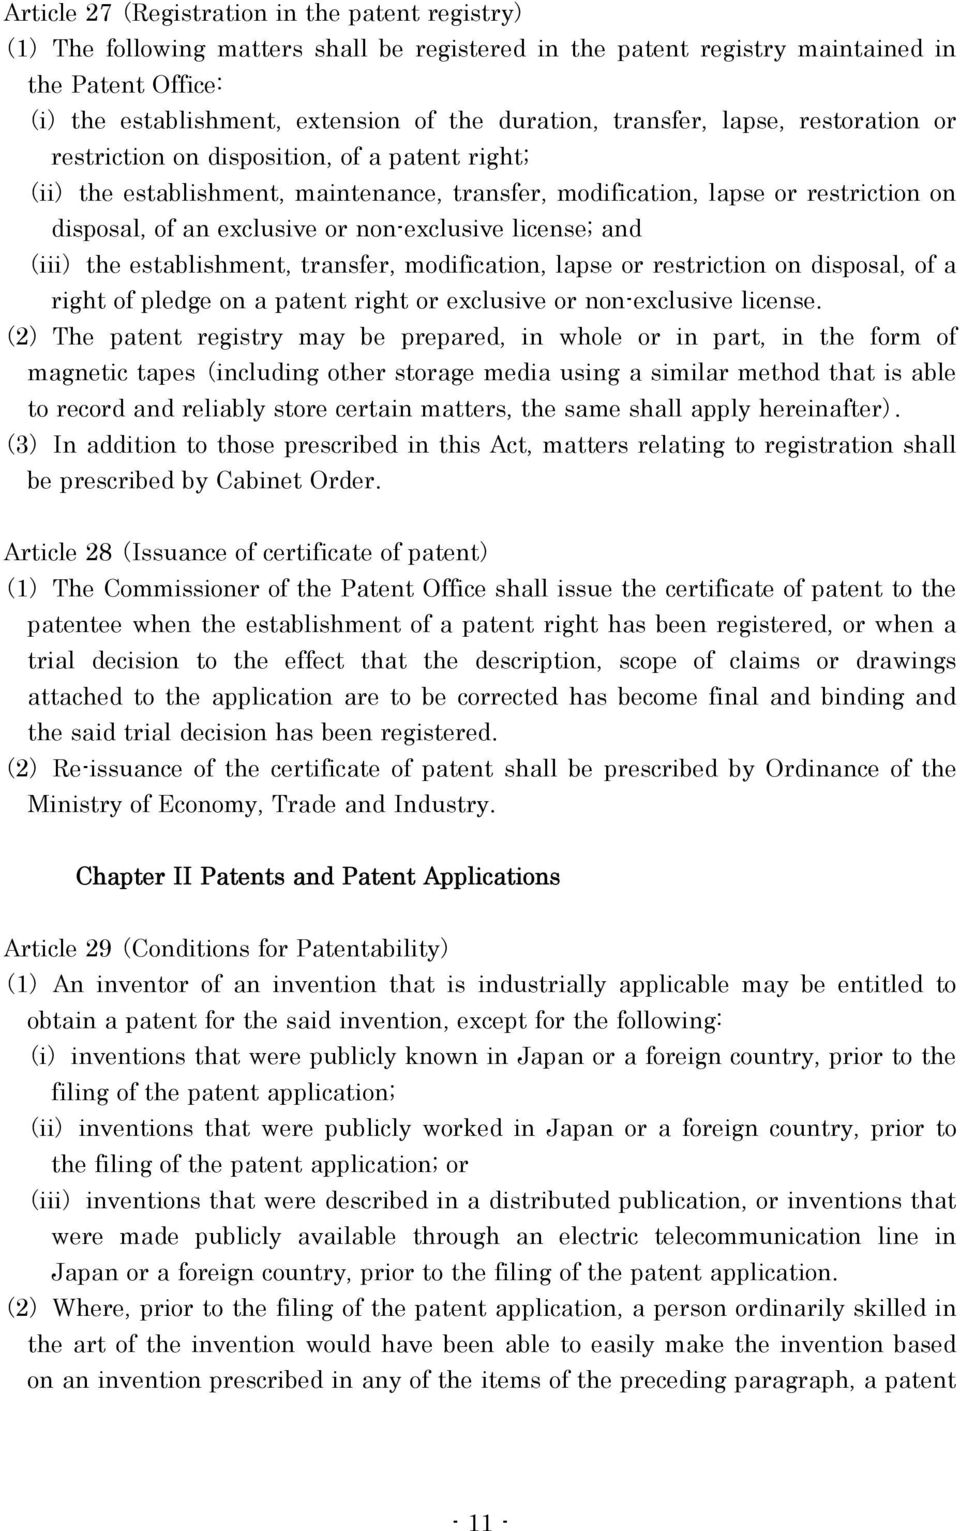 non-exclusive license; and ( iii) the establishment, transfer, modification, lapse or restriction on disposal, of a right of pledge on a patent right or exclusive or non-exclusive license.